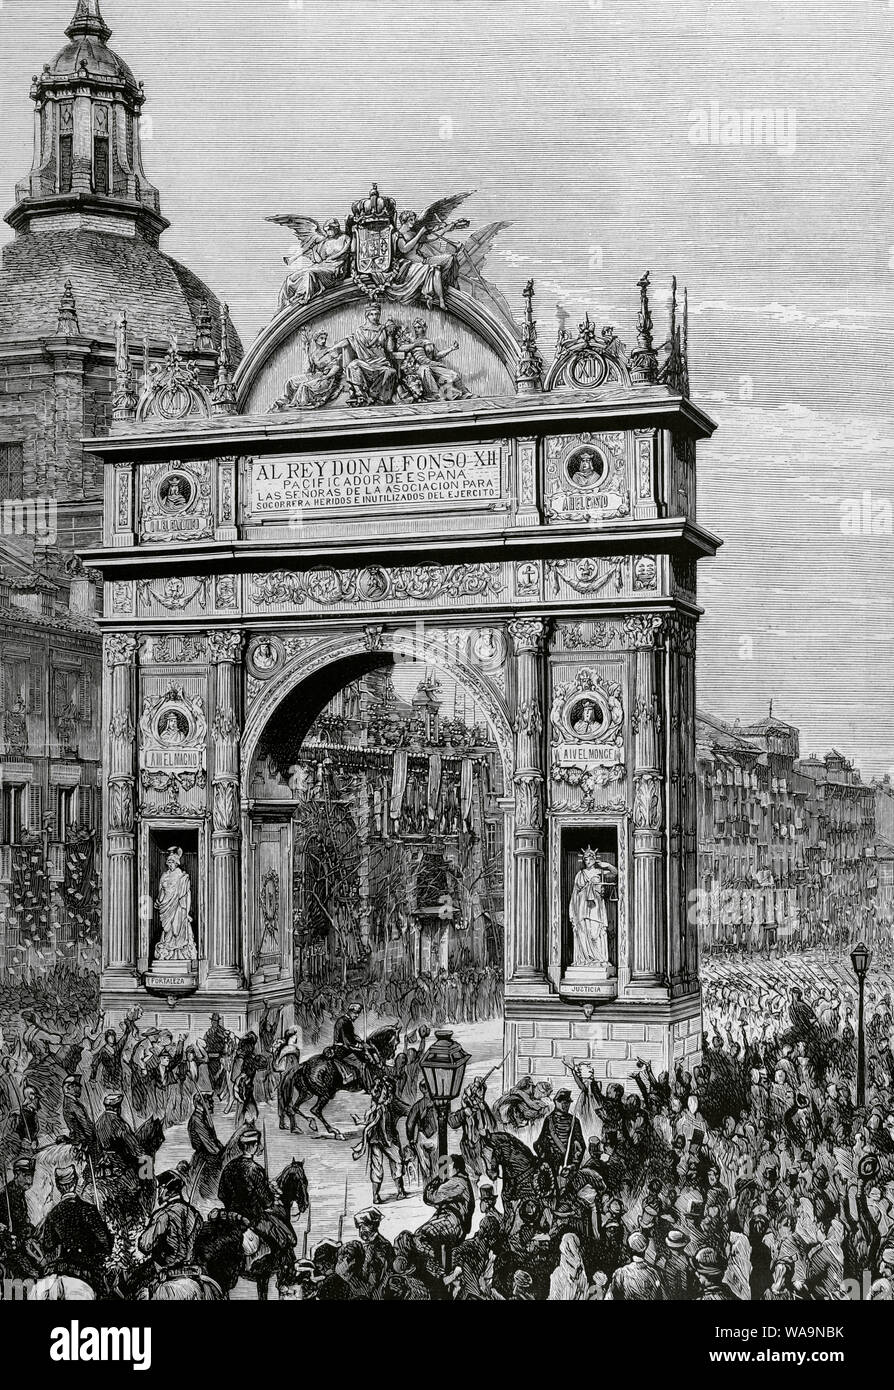 History of Spain. The Bourbon Restoration. Reign of Alfonso XII (1874-1885). Madrid. Triumphal arch built at the junction of the streets Alcala and Peligros, to greet King Alfonso XII on March 20, 1876, after the end of the Third Carlist War in 1876. Arch defrayed from the ladies of the 'Asociacion para socorrer a heridos e inutilizados del Ejercito' (Association to help the wounded and disabled of the Army) during the Carlist wars). Life drawing by Juan Comba. Engraving. La Ilustracion Española y Americana. March 30, 1876. Stock Photo